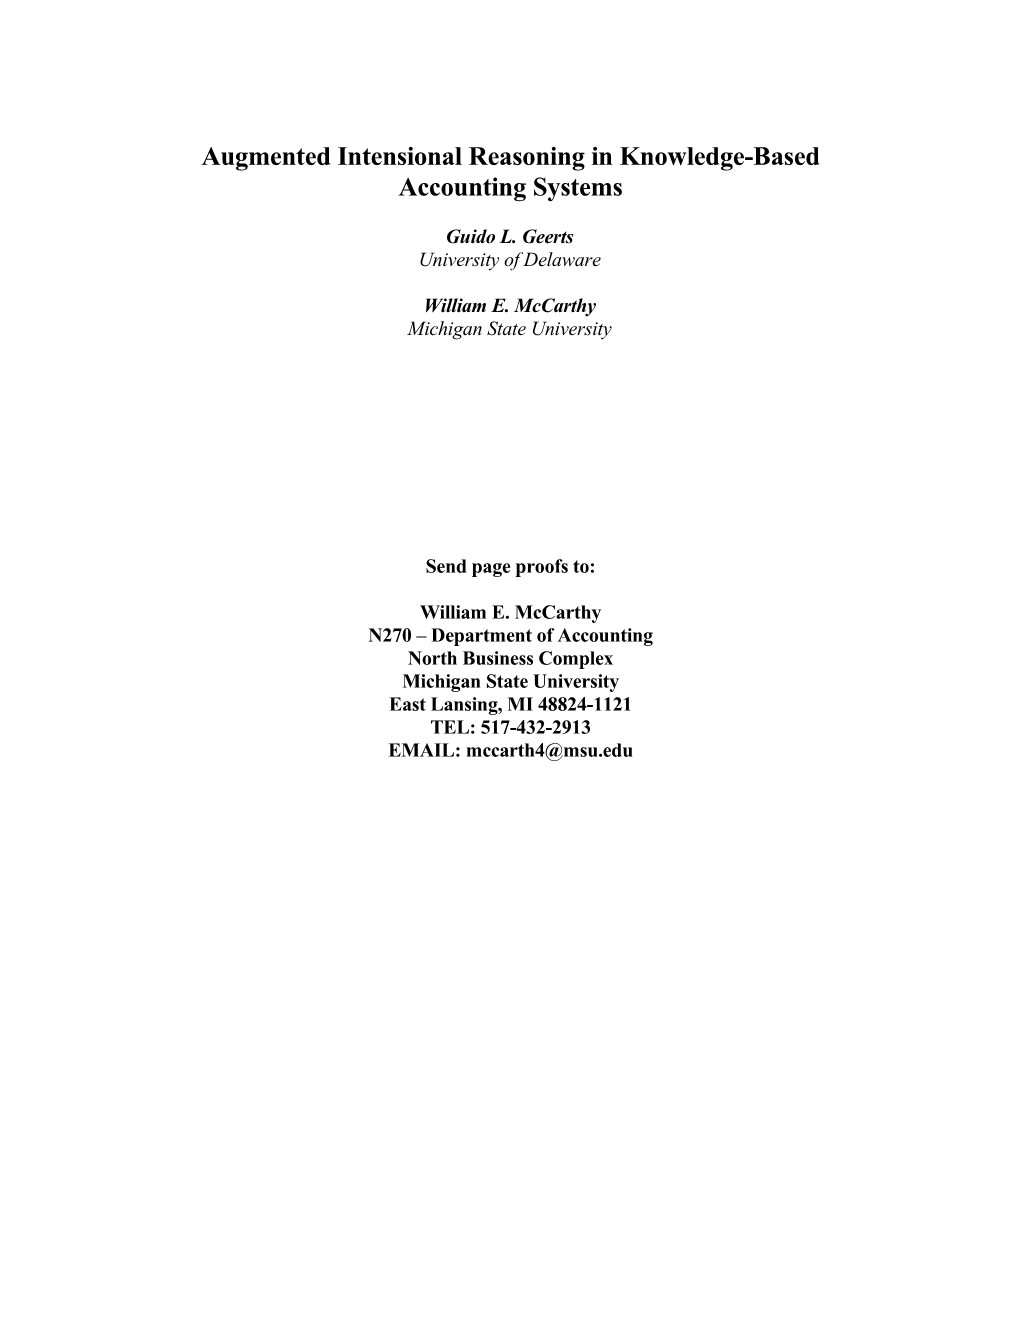 Augmented Intensional Reasoning in Knowledge-Based Accounting Systems